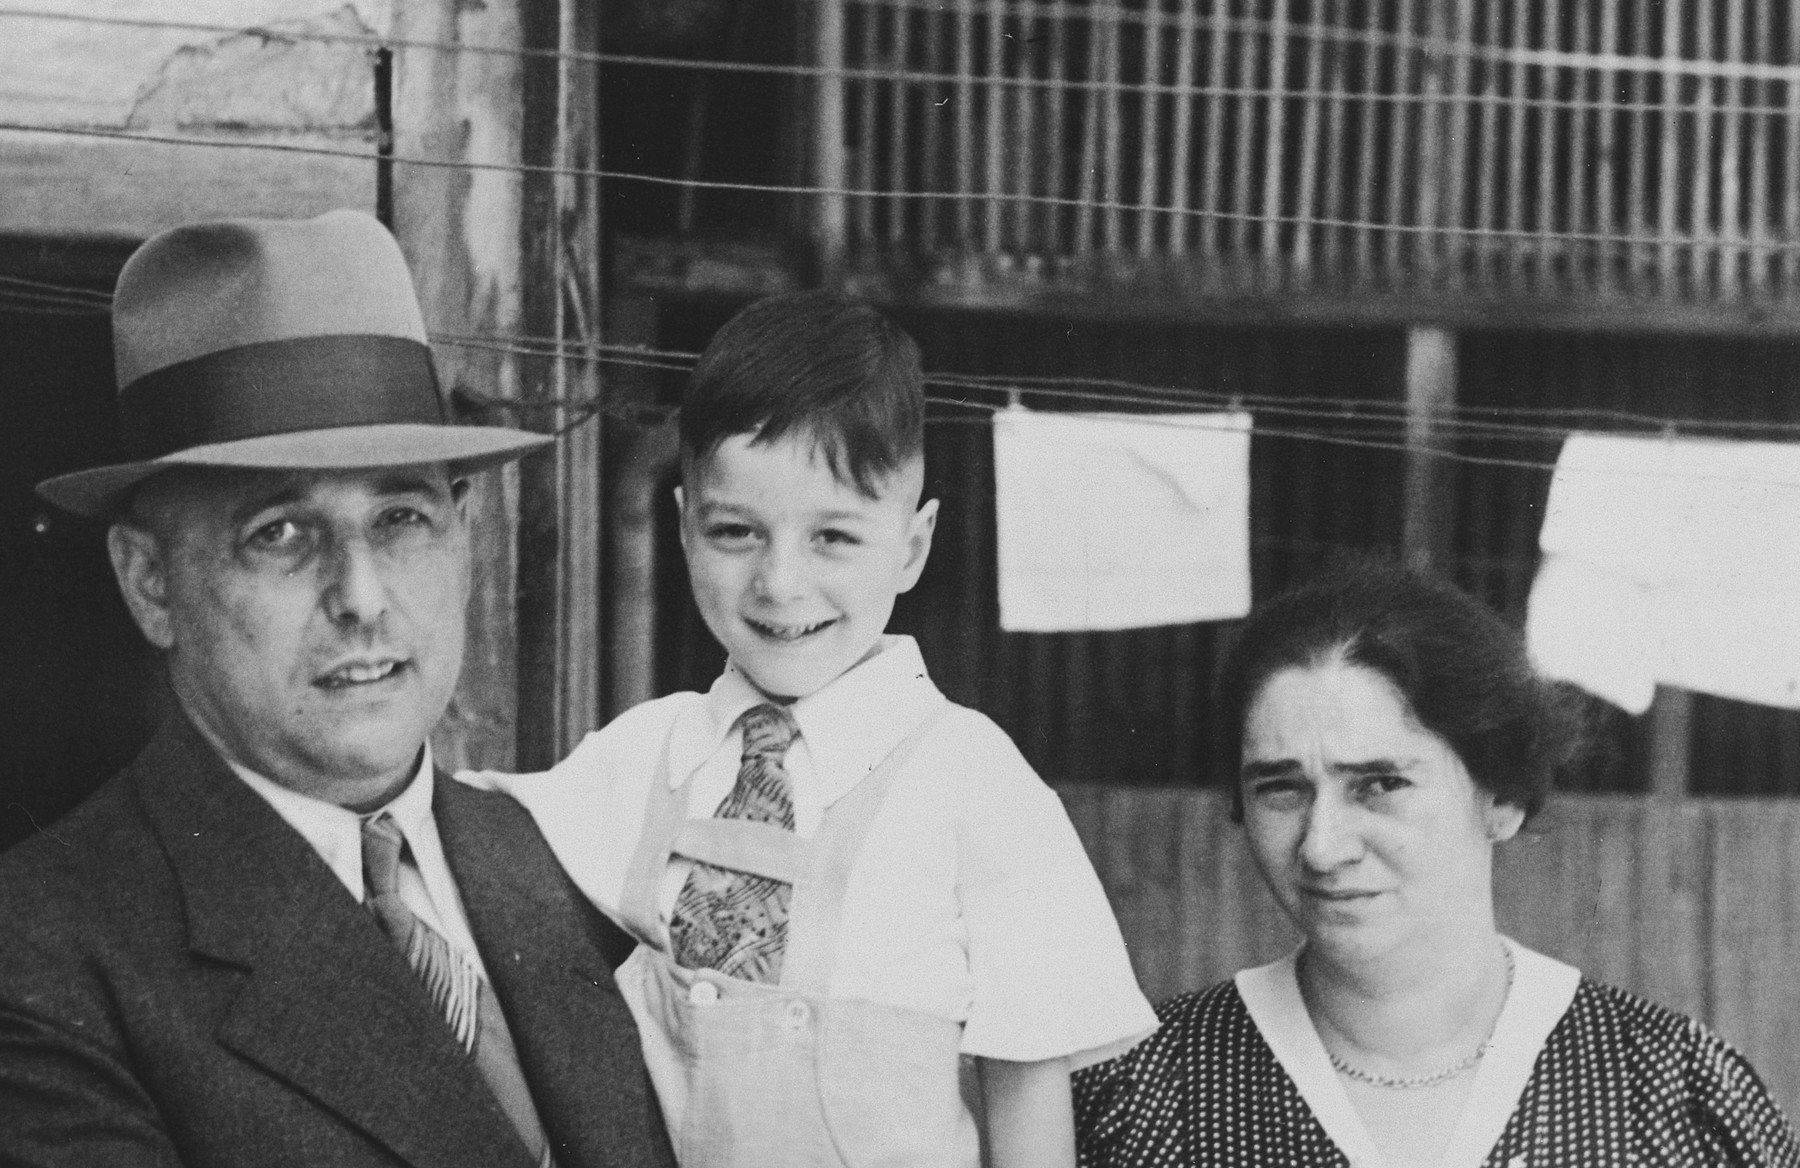 Close-up portrait of a Jewish family in Breisach, Germany.

Pictured are Hugo, Arno and Hulda Geismar.  Hulda was born on July 7, 1899.  Hugo was born in Breisach on March 27, 1890.  Arno was the last Jewish child to be born in Breisach in 1932.  The family escaped to the United States.

This is part of series of photographs taken of the Breisach Jewish community on their way to and from synagogue in 1937.  In October 1940 the entire community was deported to the Gurs internment camp in southern France.